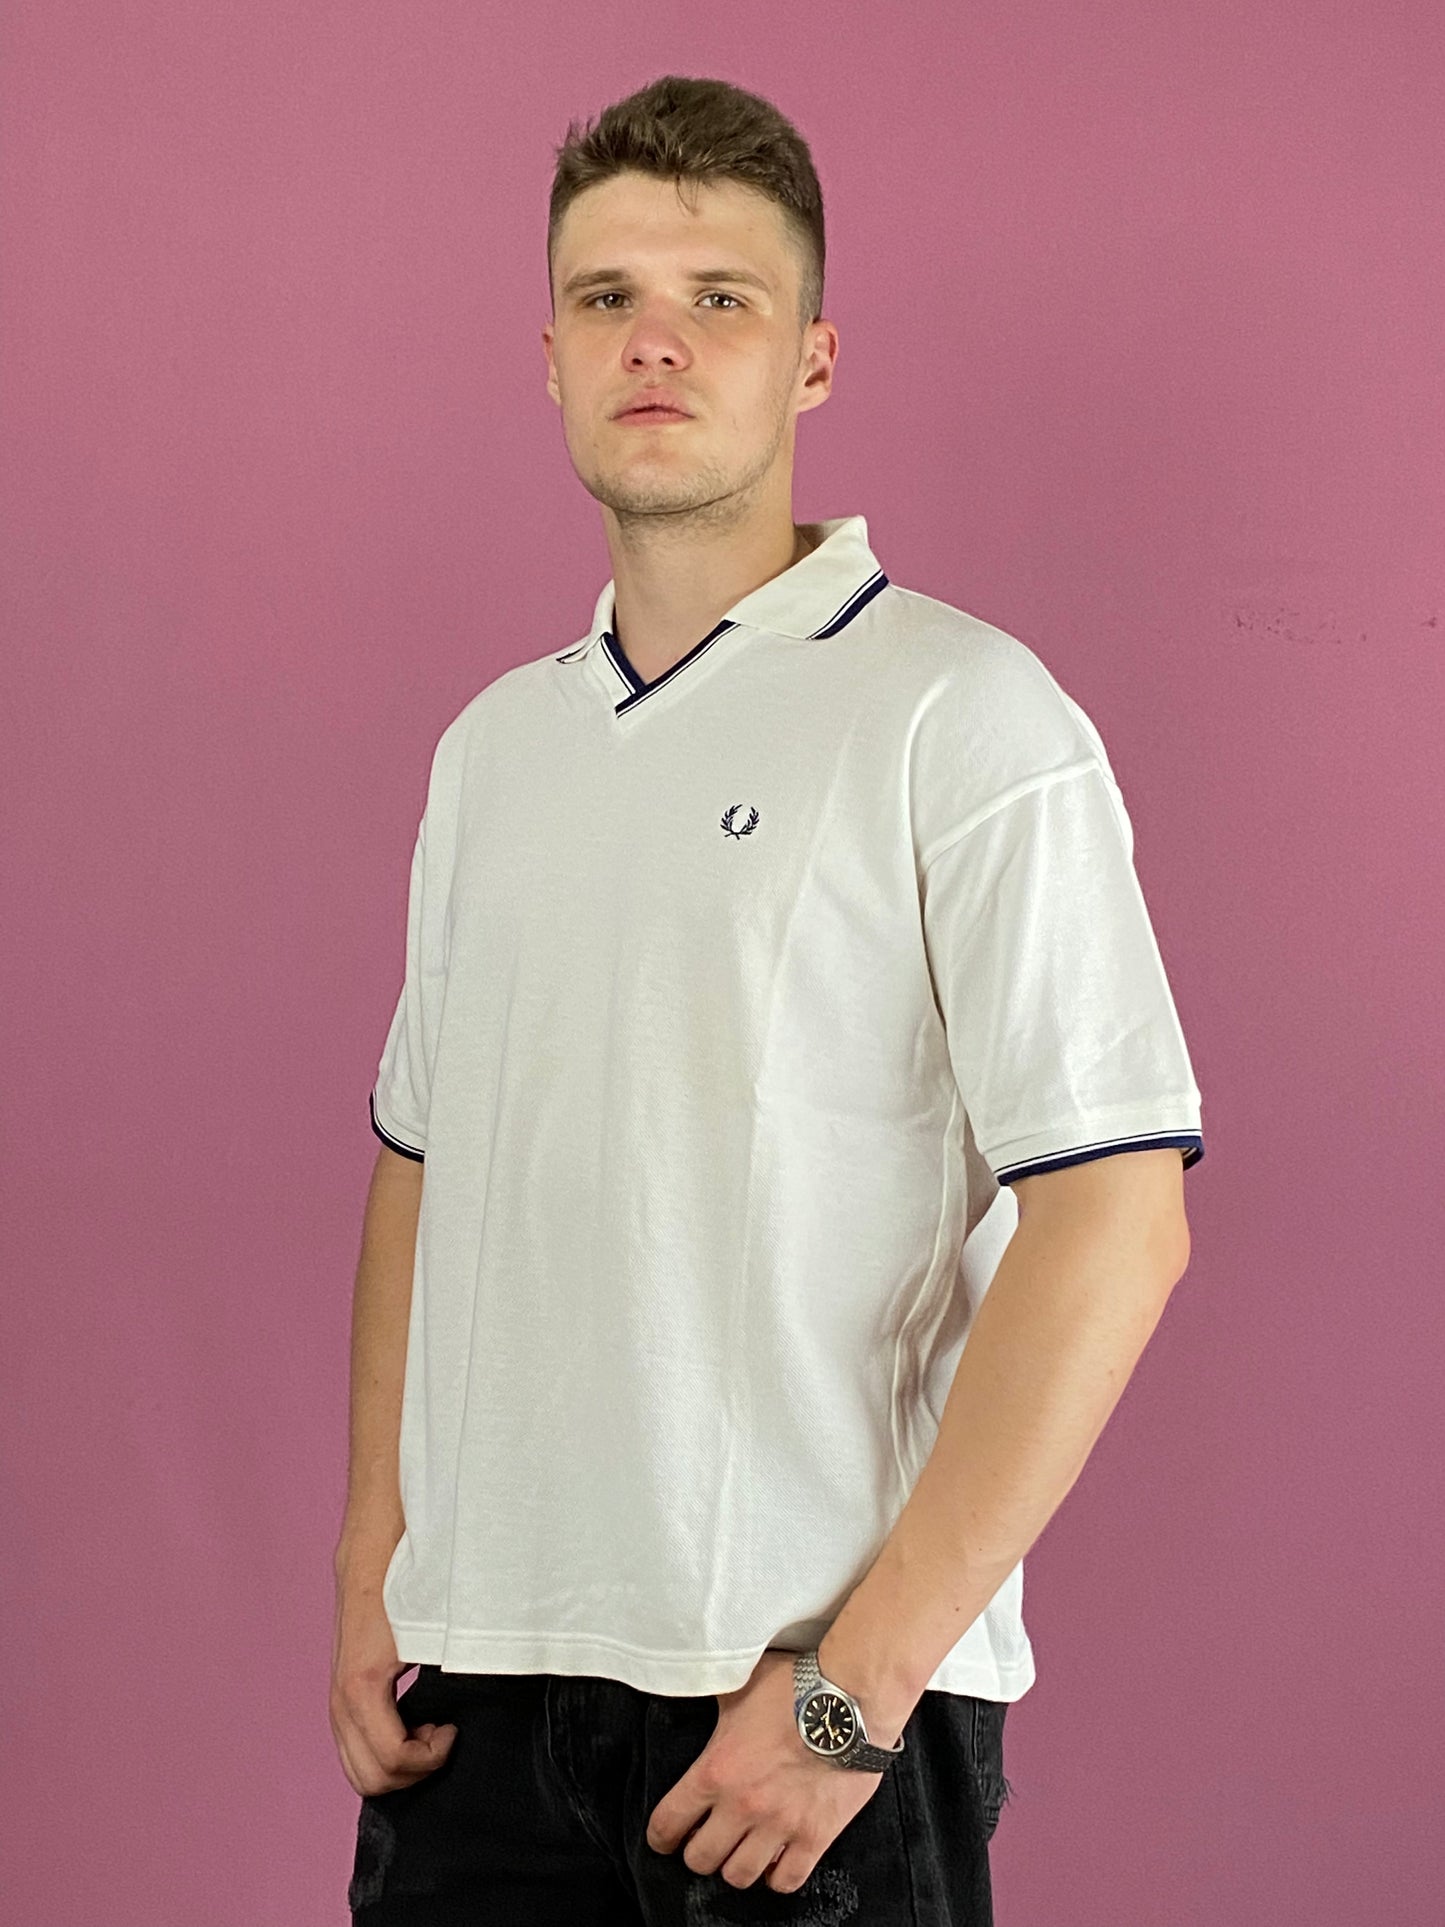 90s Fred Perry Vintage Men's Polo Shirt - Large White Cotton